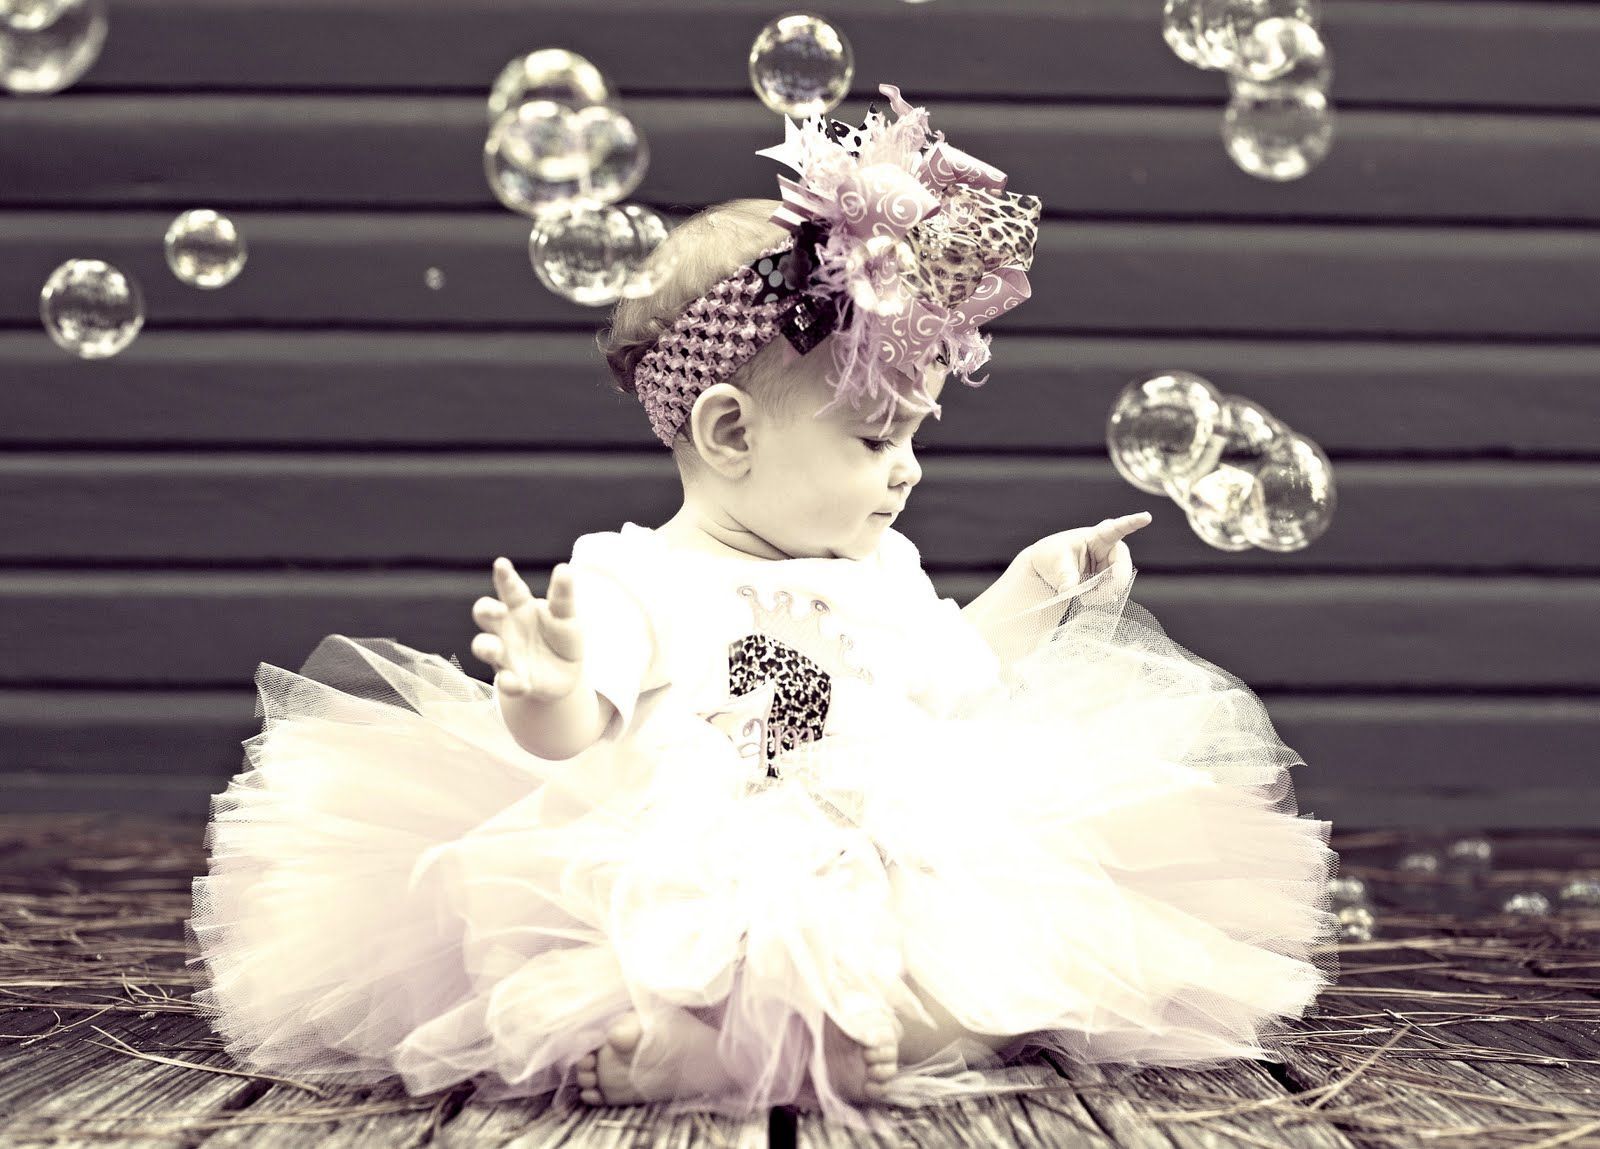 baby and bubbles pose :) love the use of bubbles with photography!